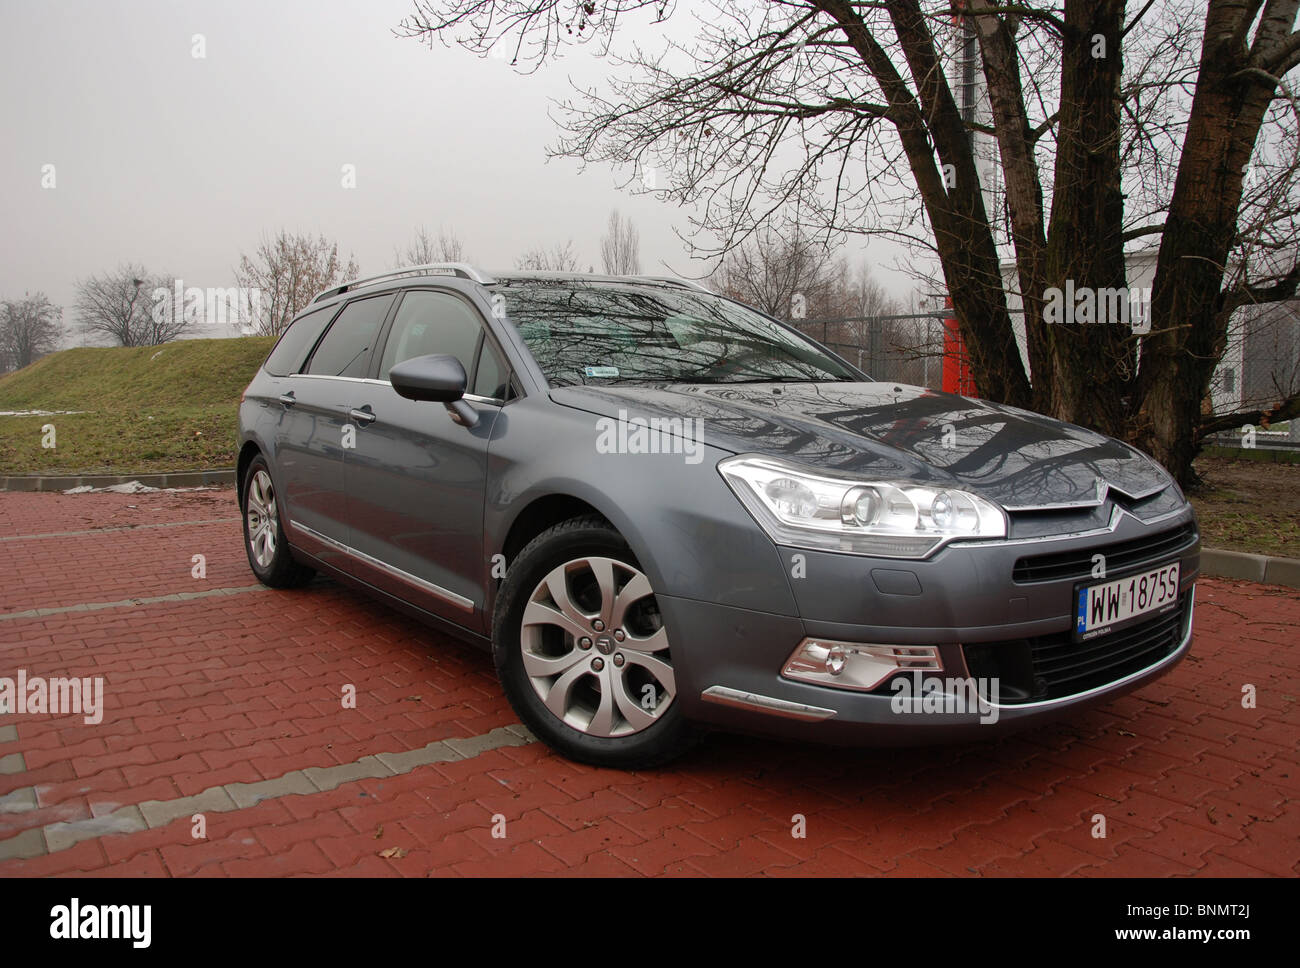 Citroen C5 Tourer 2.0 HDI - MY 2009 - gray - five doors - French popular higher middle class car, segment D - on park space Stock Photo